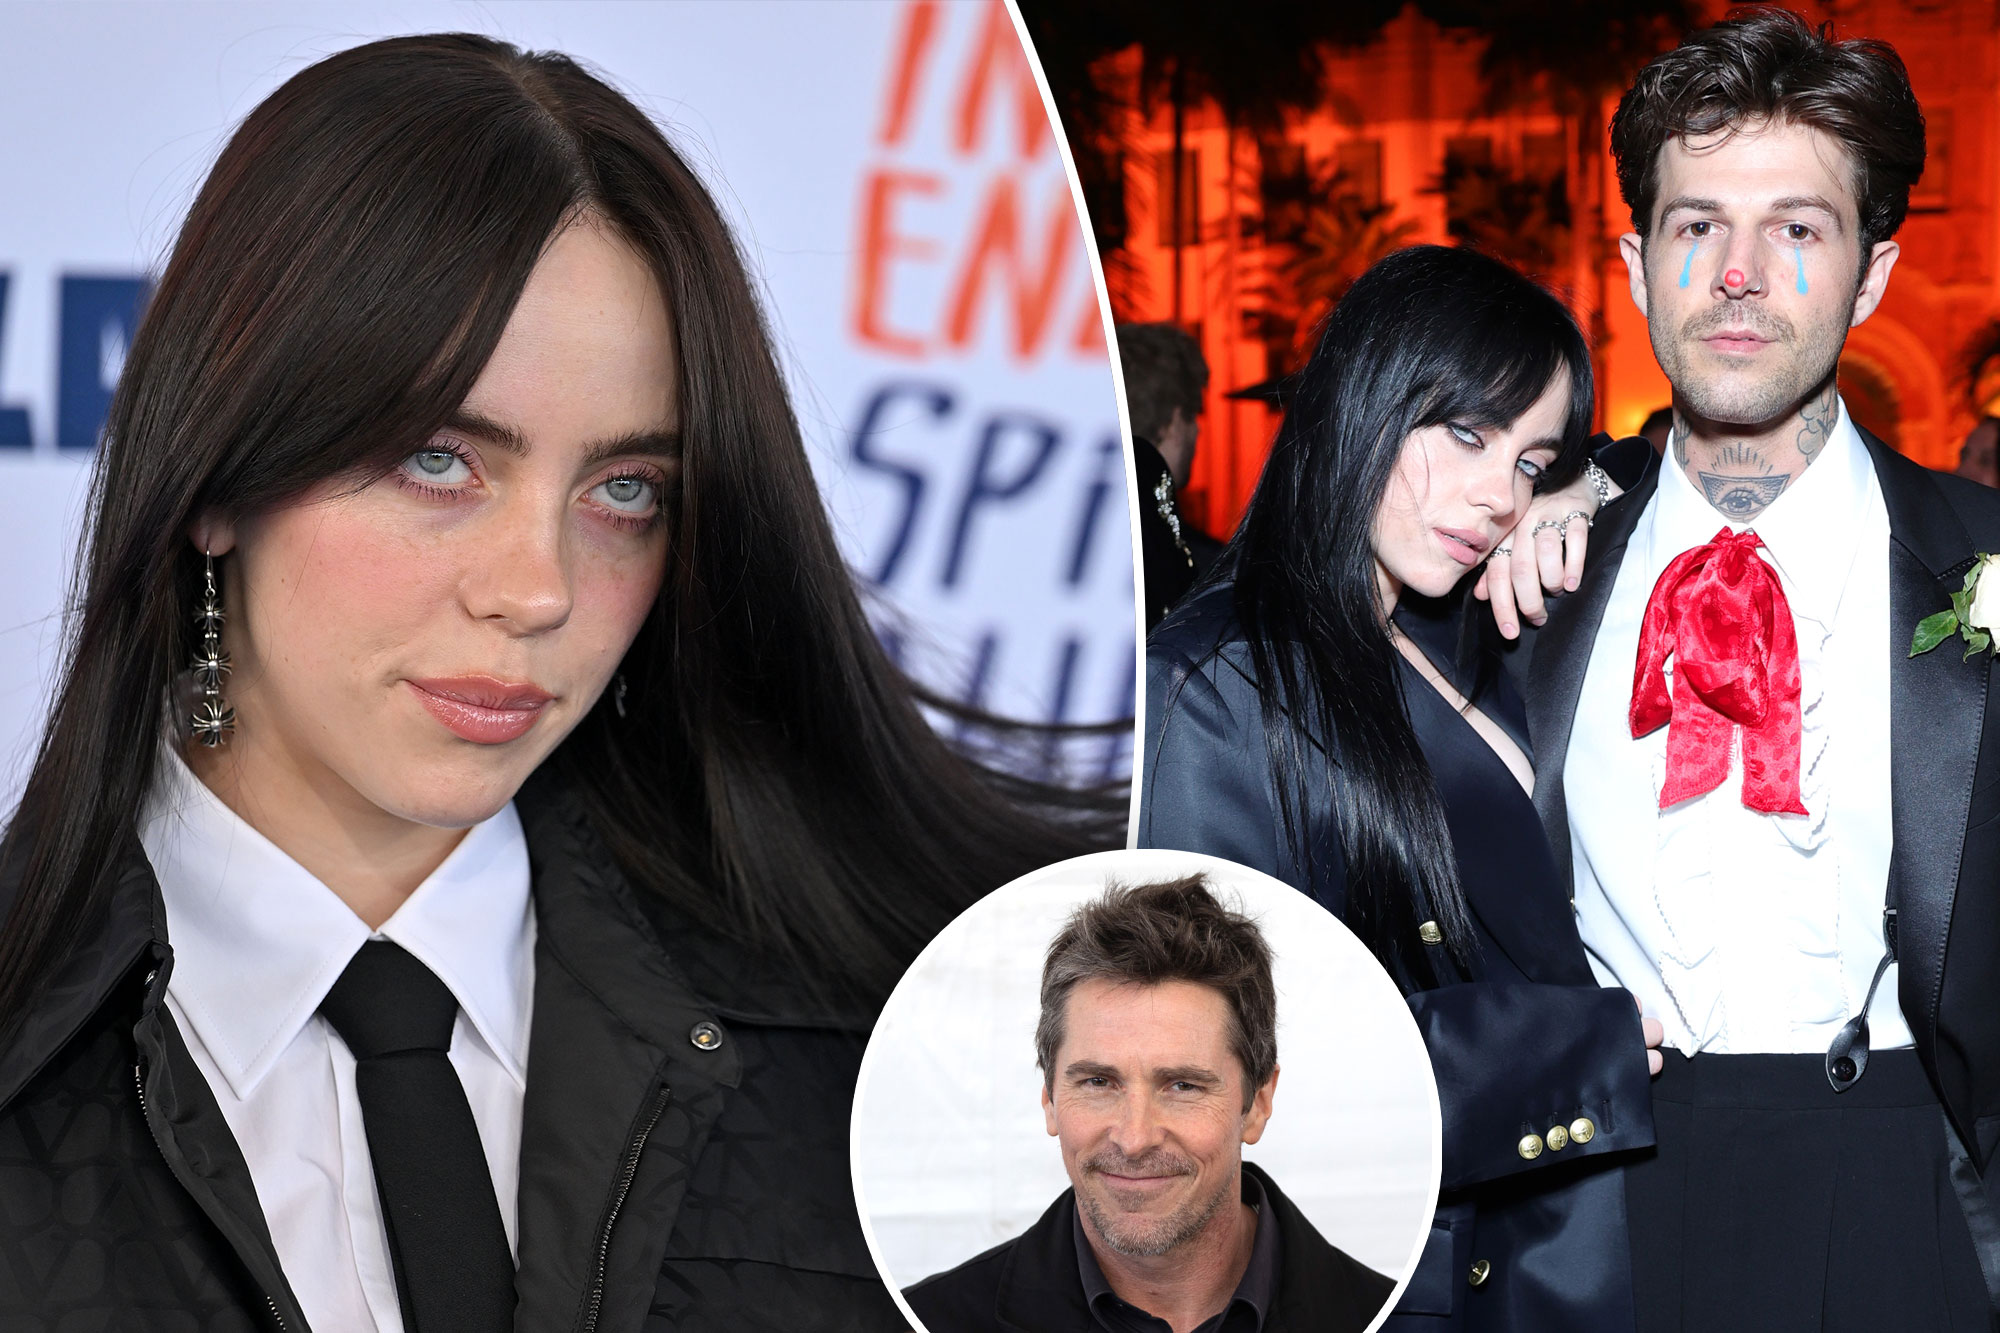 Billie Eilish says dreaming about Christian Bale led to a breakup: ‘Came to my senses’